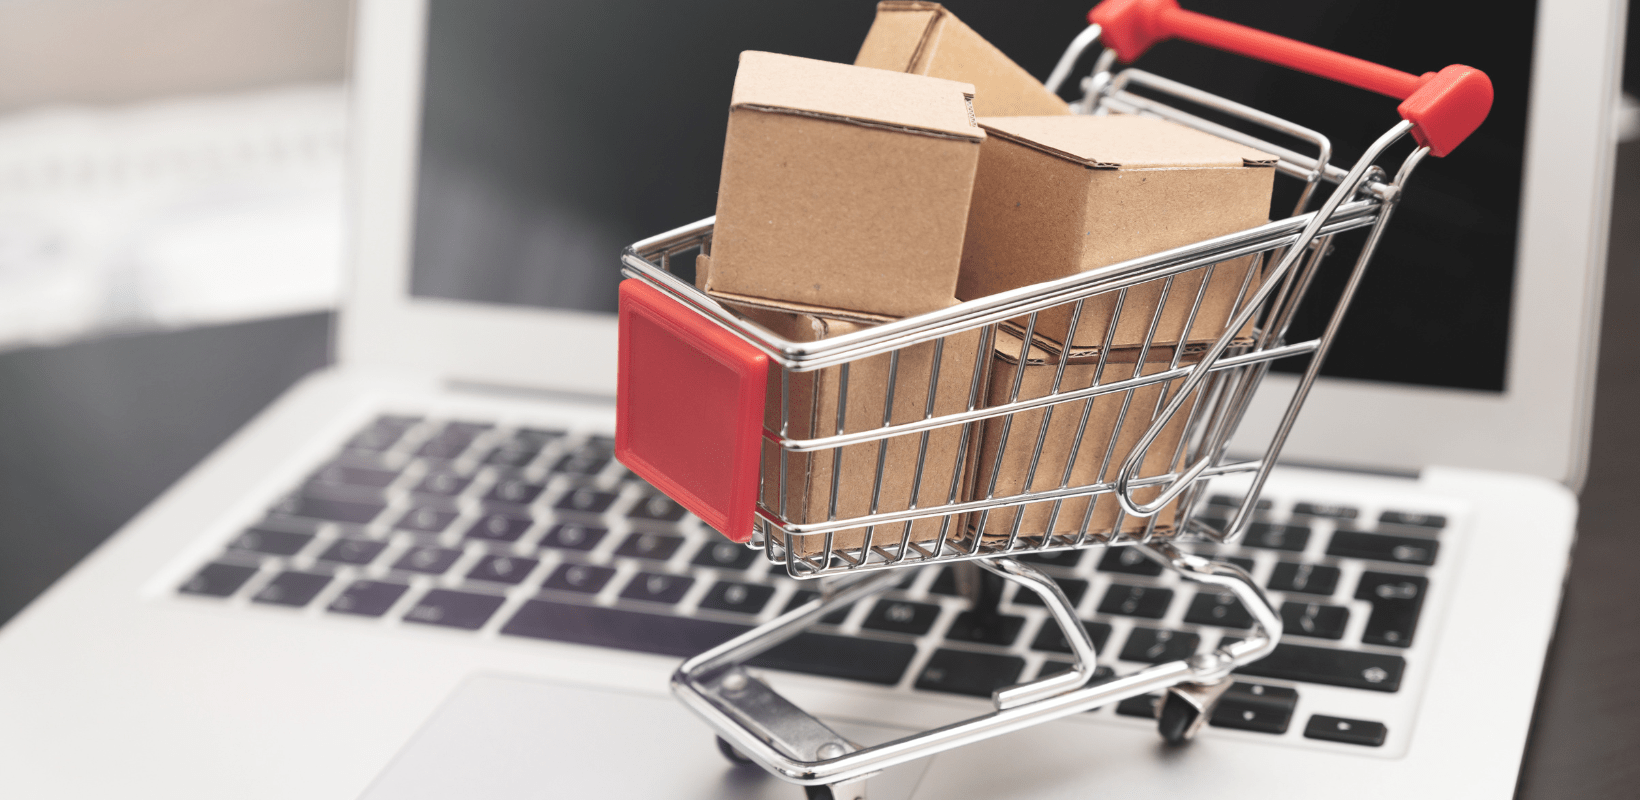 How To Find Suppliers for Your Online Store